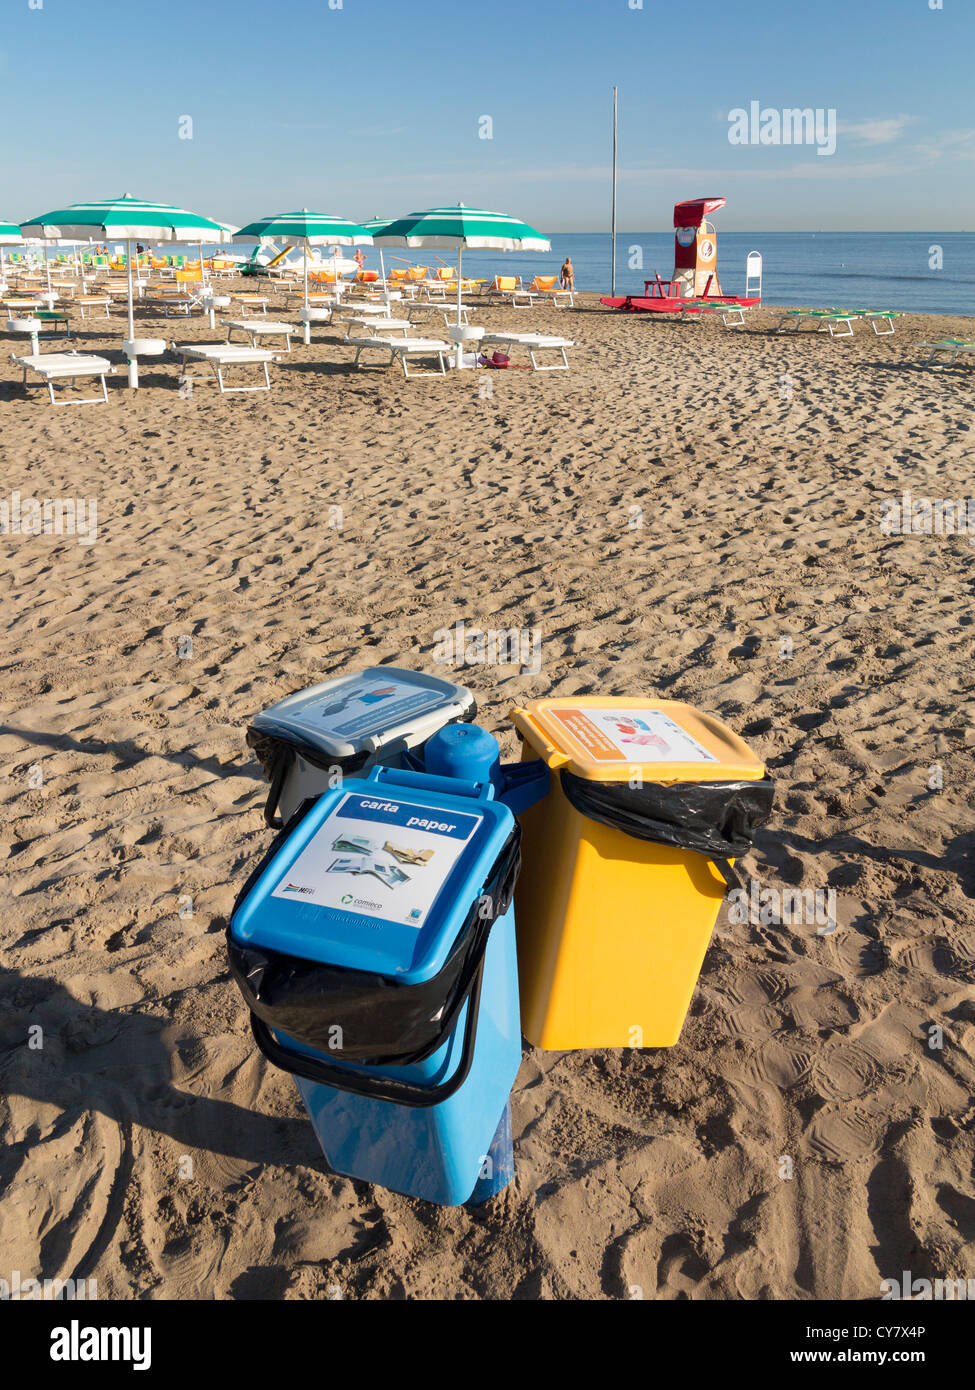 Recycling bins on a beach in Italy Stock Photo